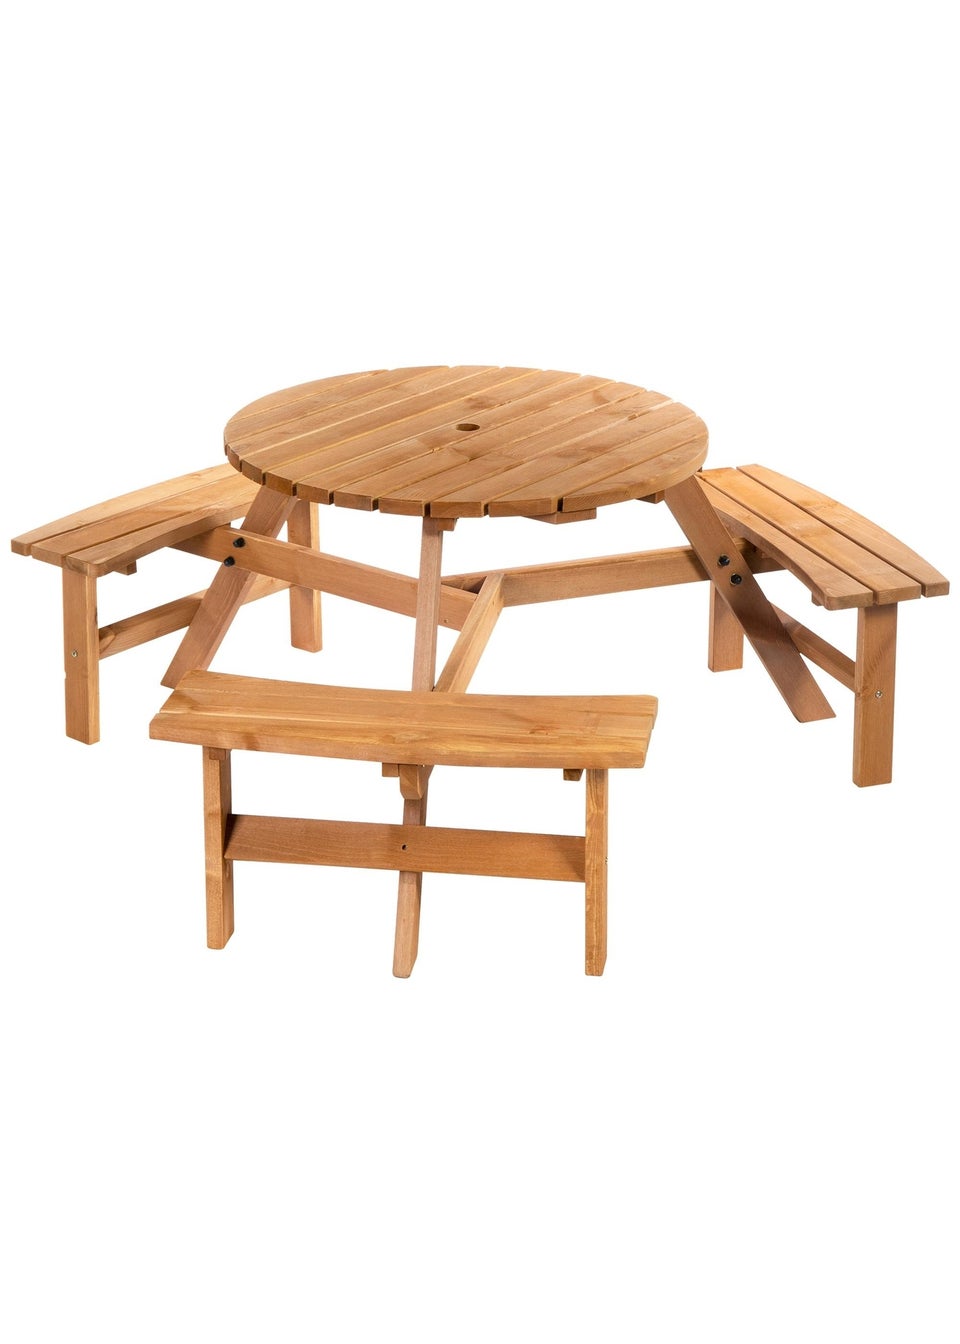 Outsunny 6 Seater Wooden Picnic Table and Bench Set Round Patio Dining Set with 3 Benches and Umbrella Hole